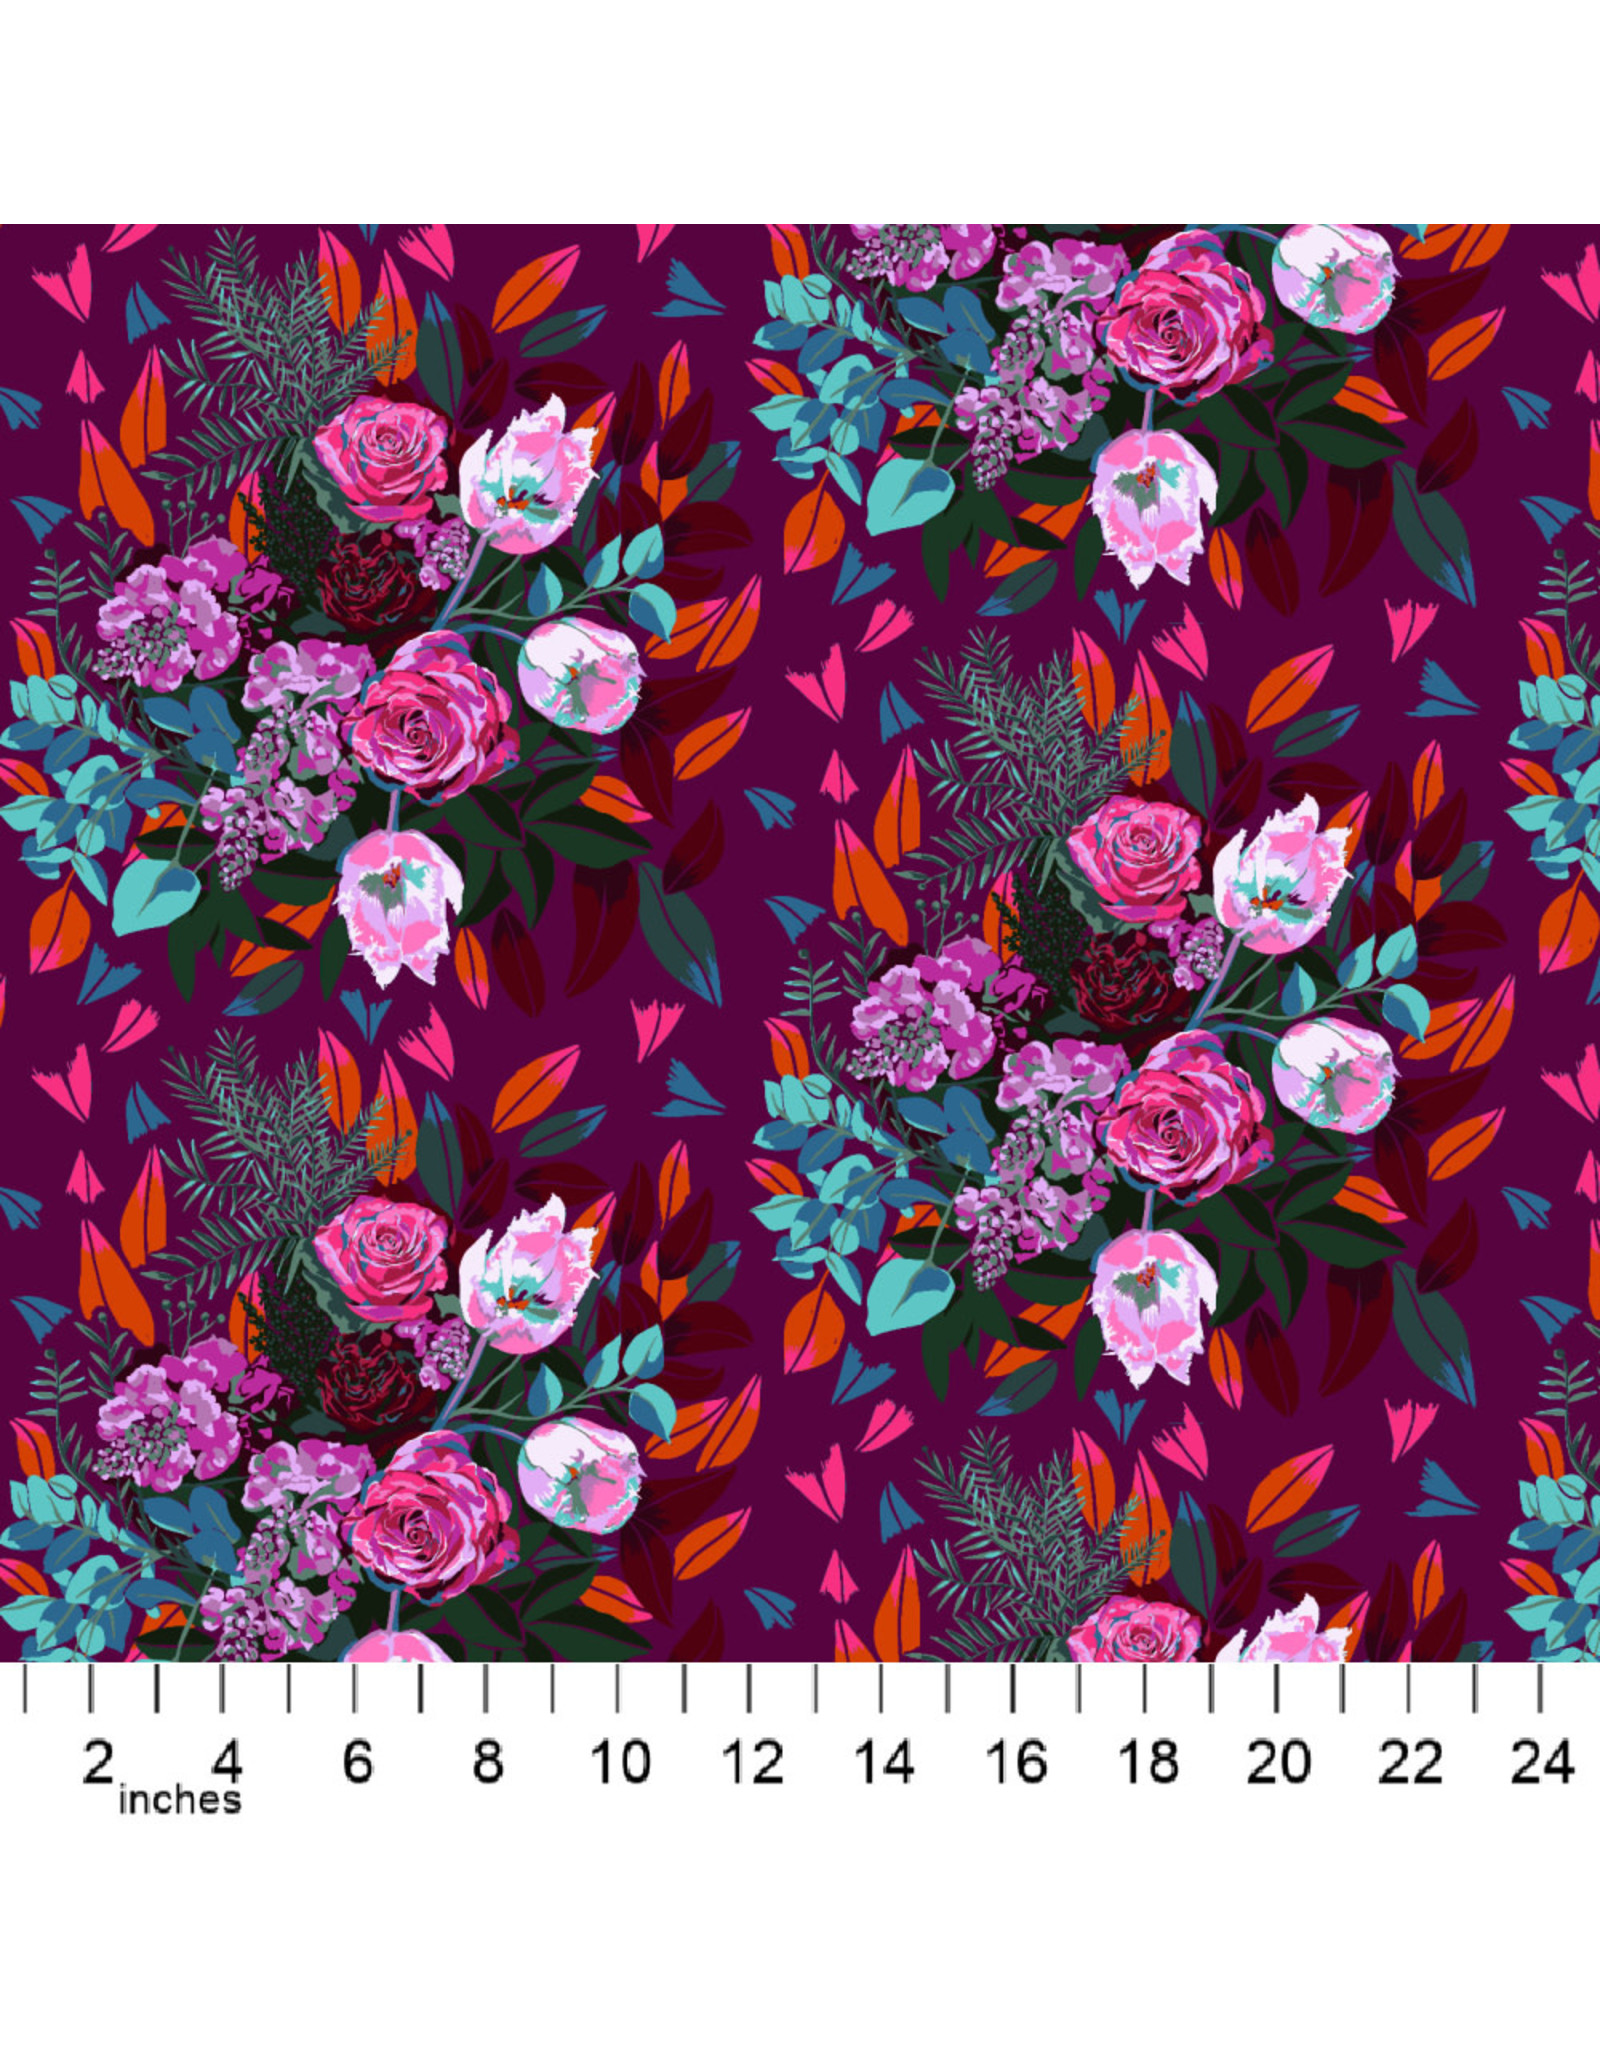 Anna Maria Made My Day, New Flame in Sweetly, Fabric Half-Yards